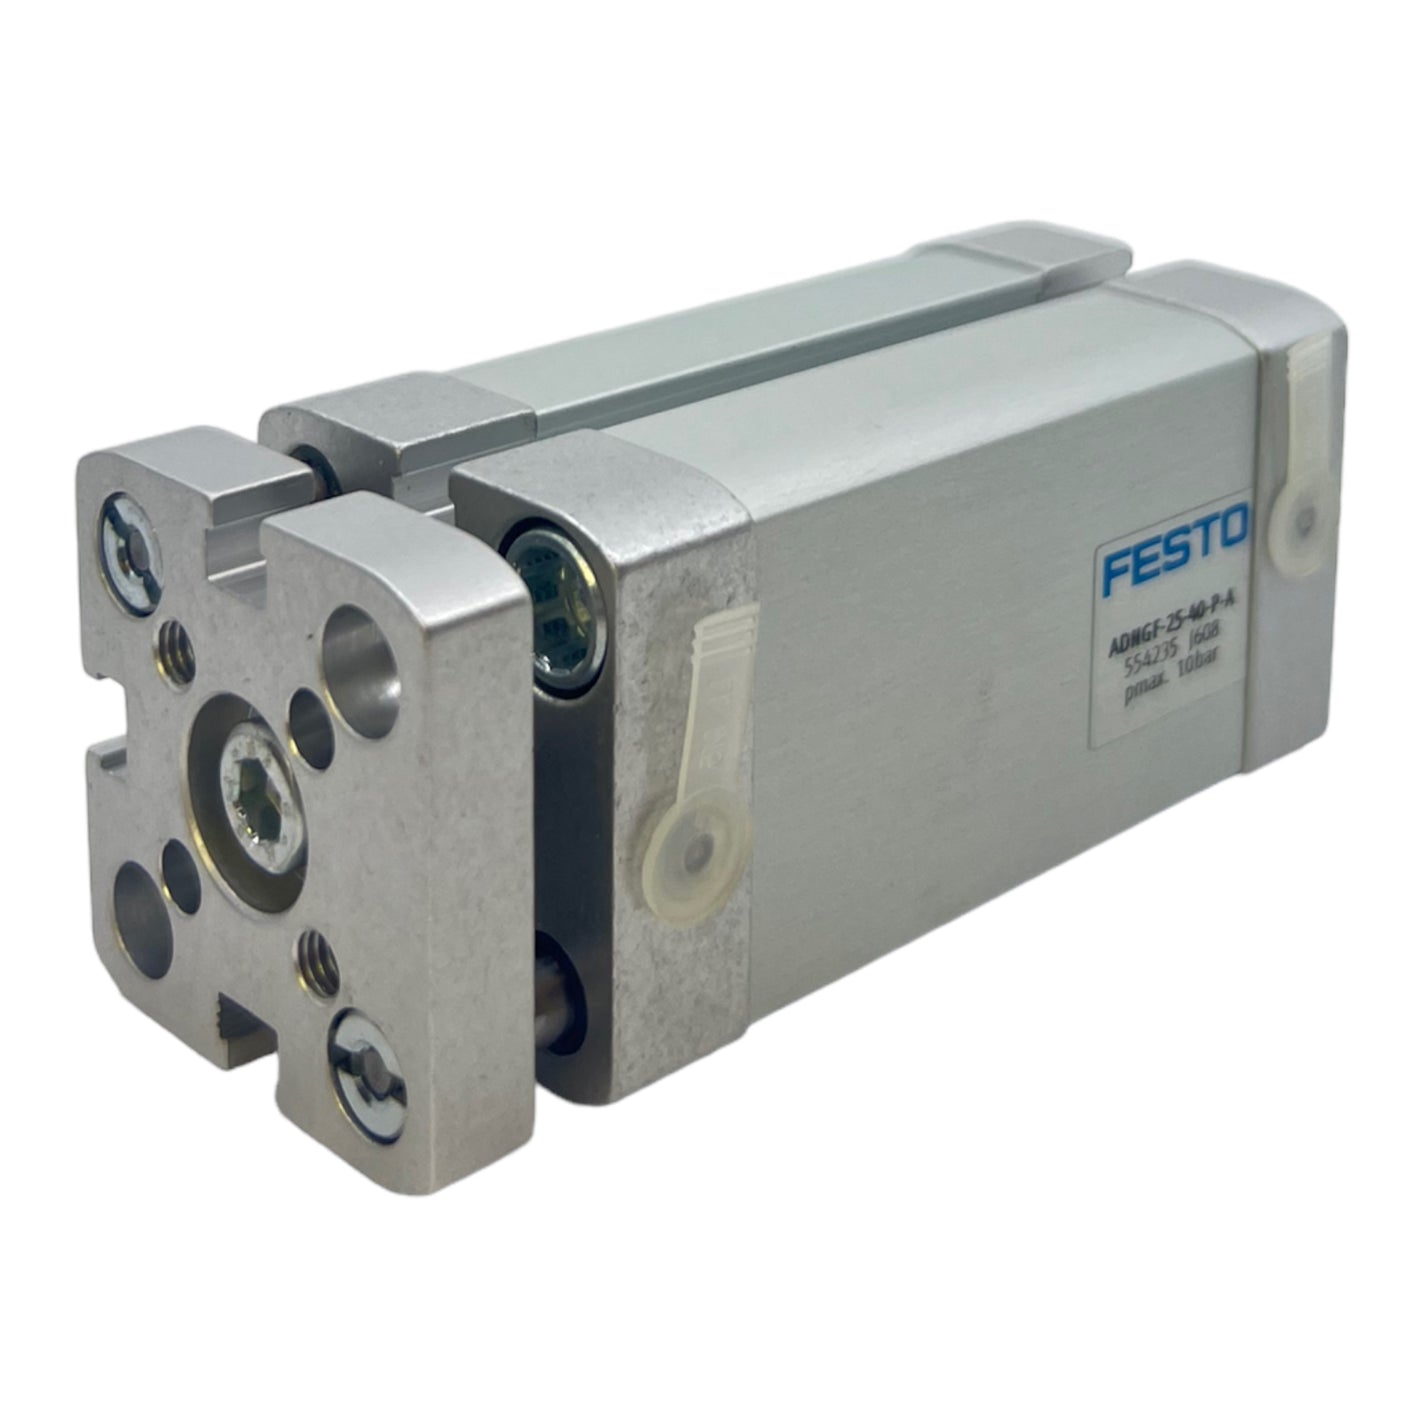 Festo ADNGF-25-40-PA compact cylinder 554235 pneumatic cylinder M5 